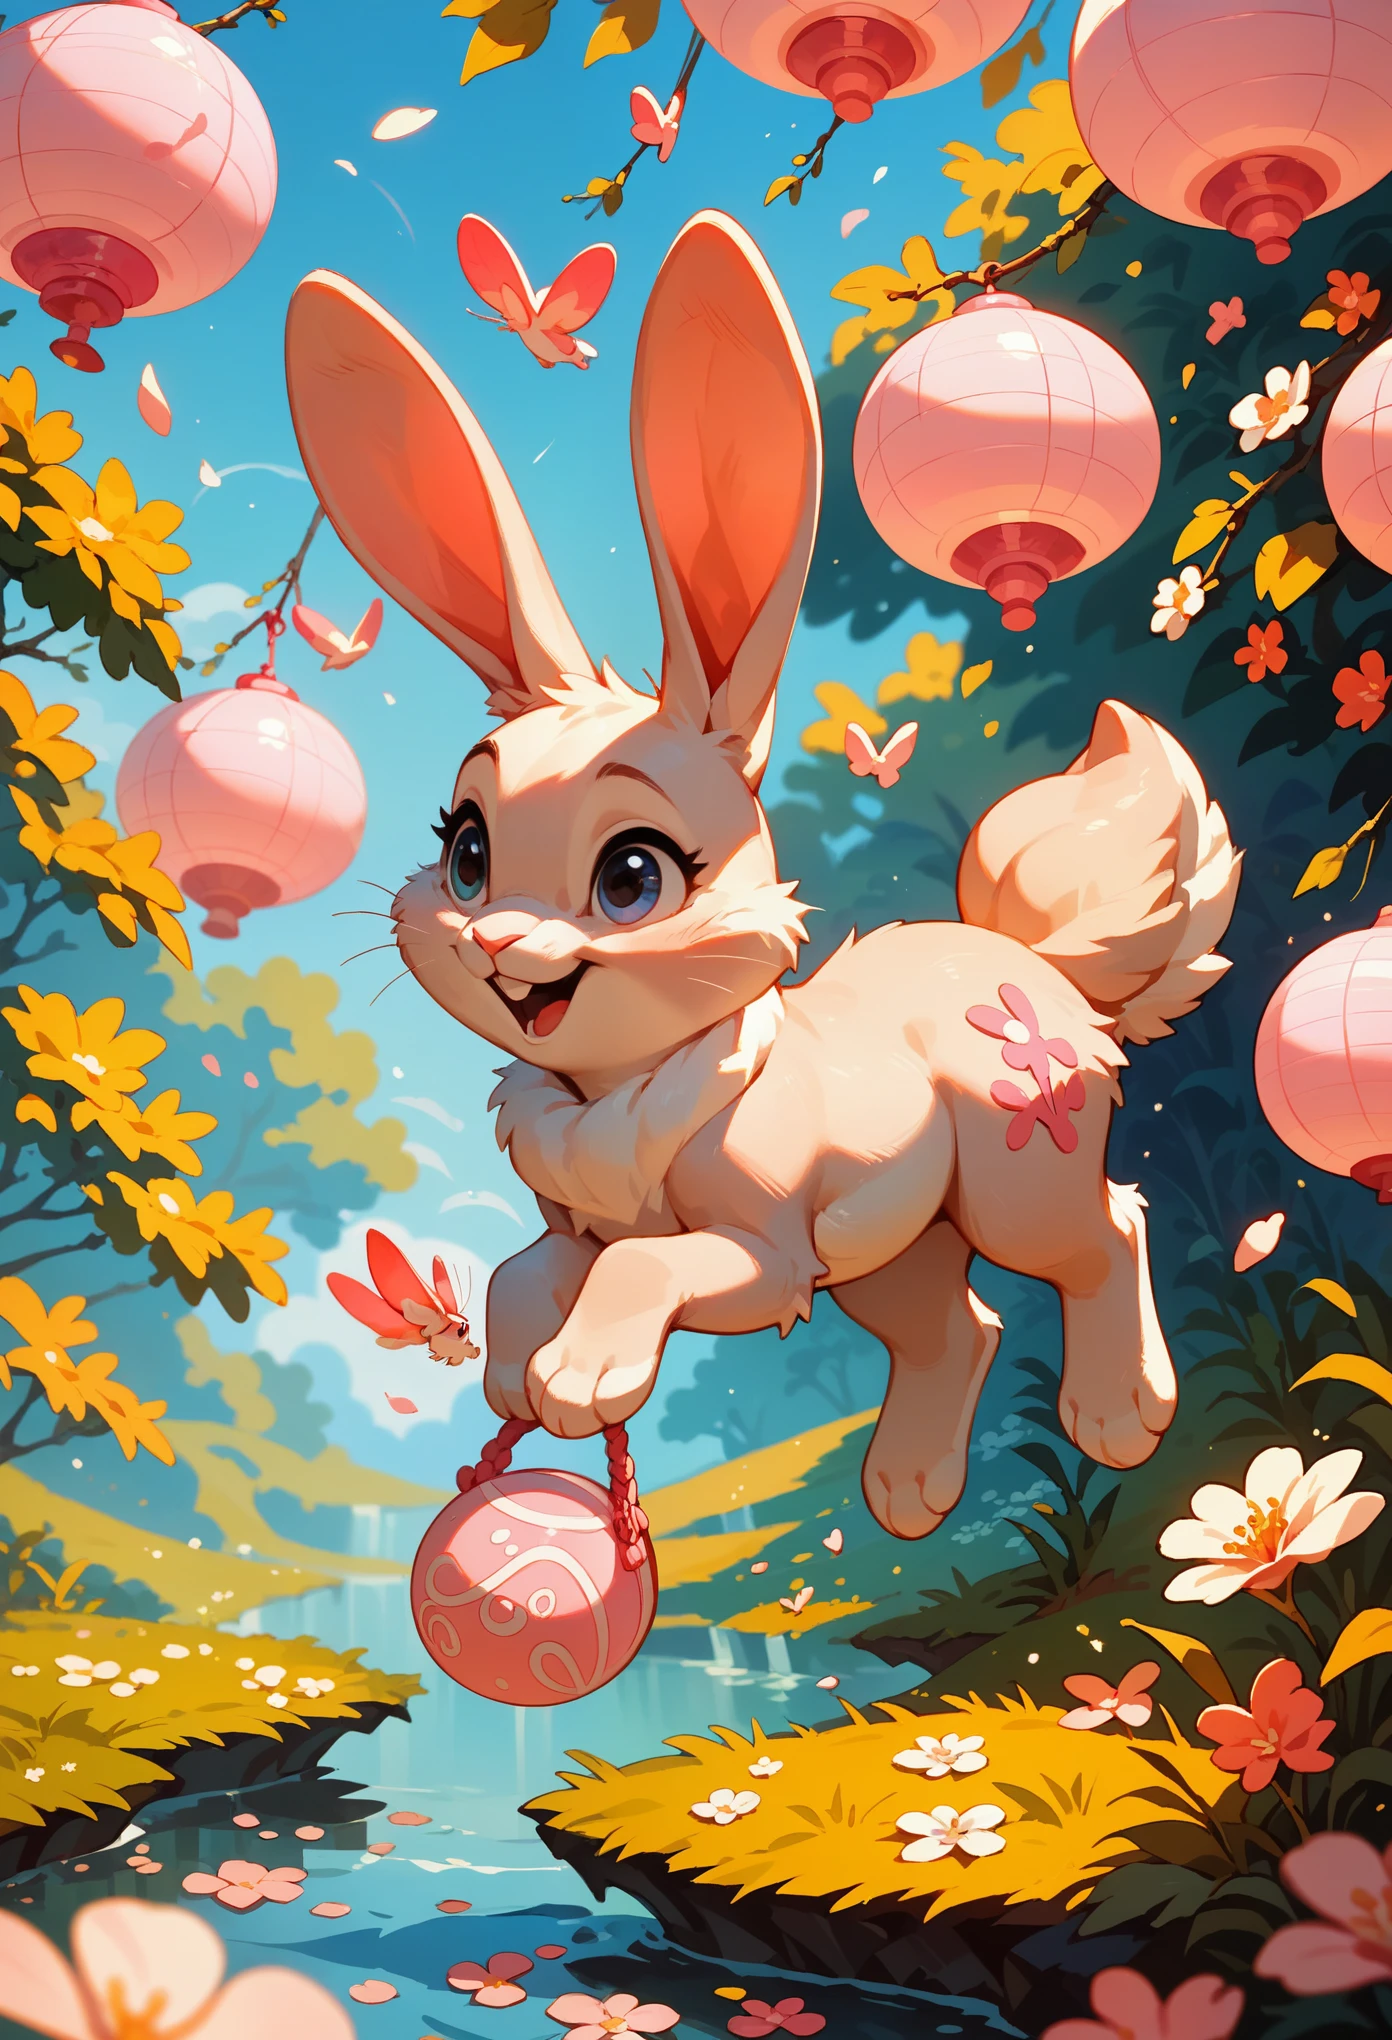 score_9, score_8_up, score_7_up, an adorable bunny, ambient spring, white and pink tetradic colors